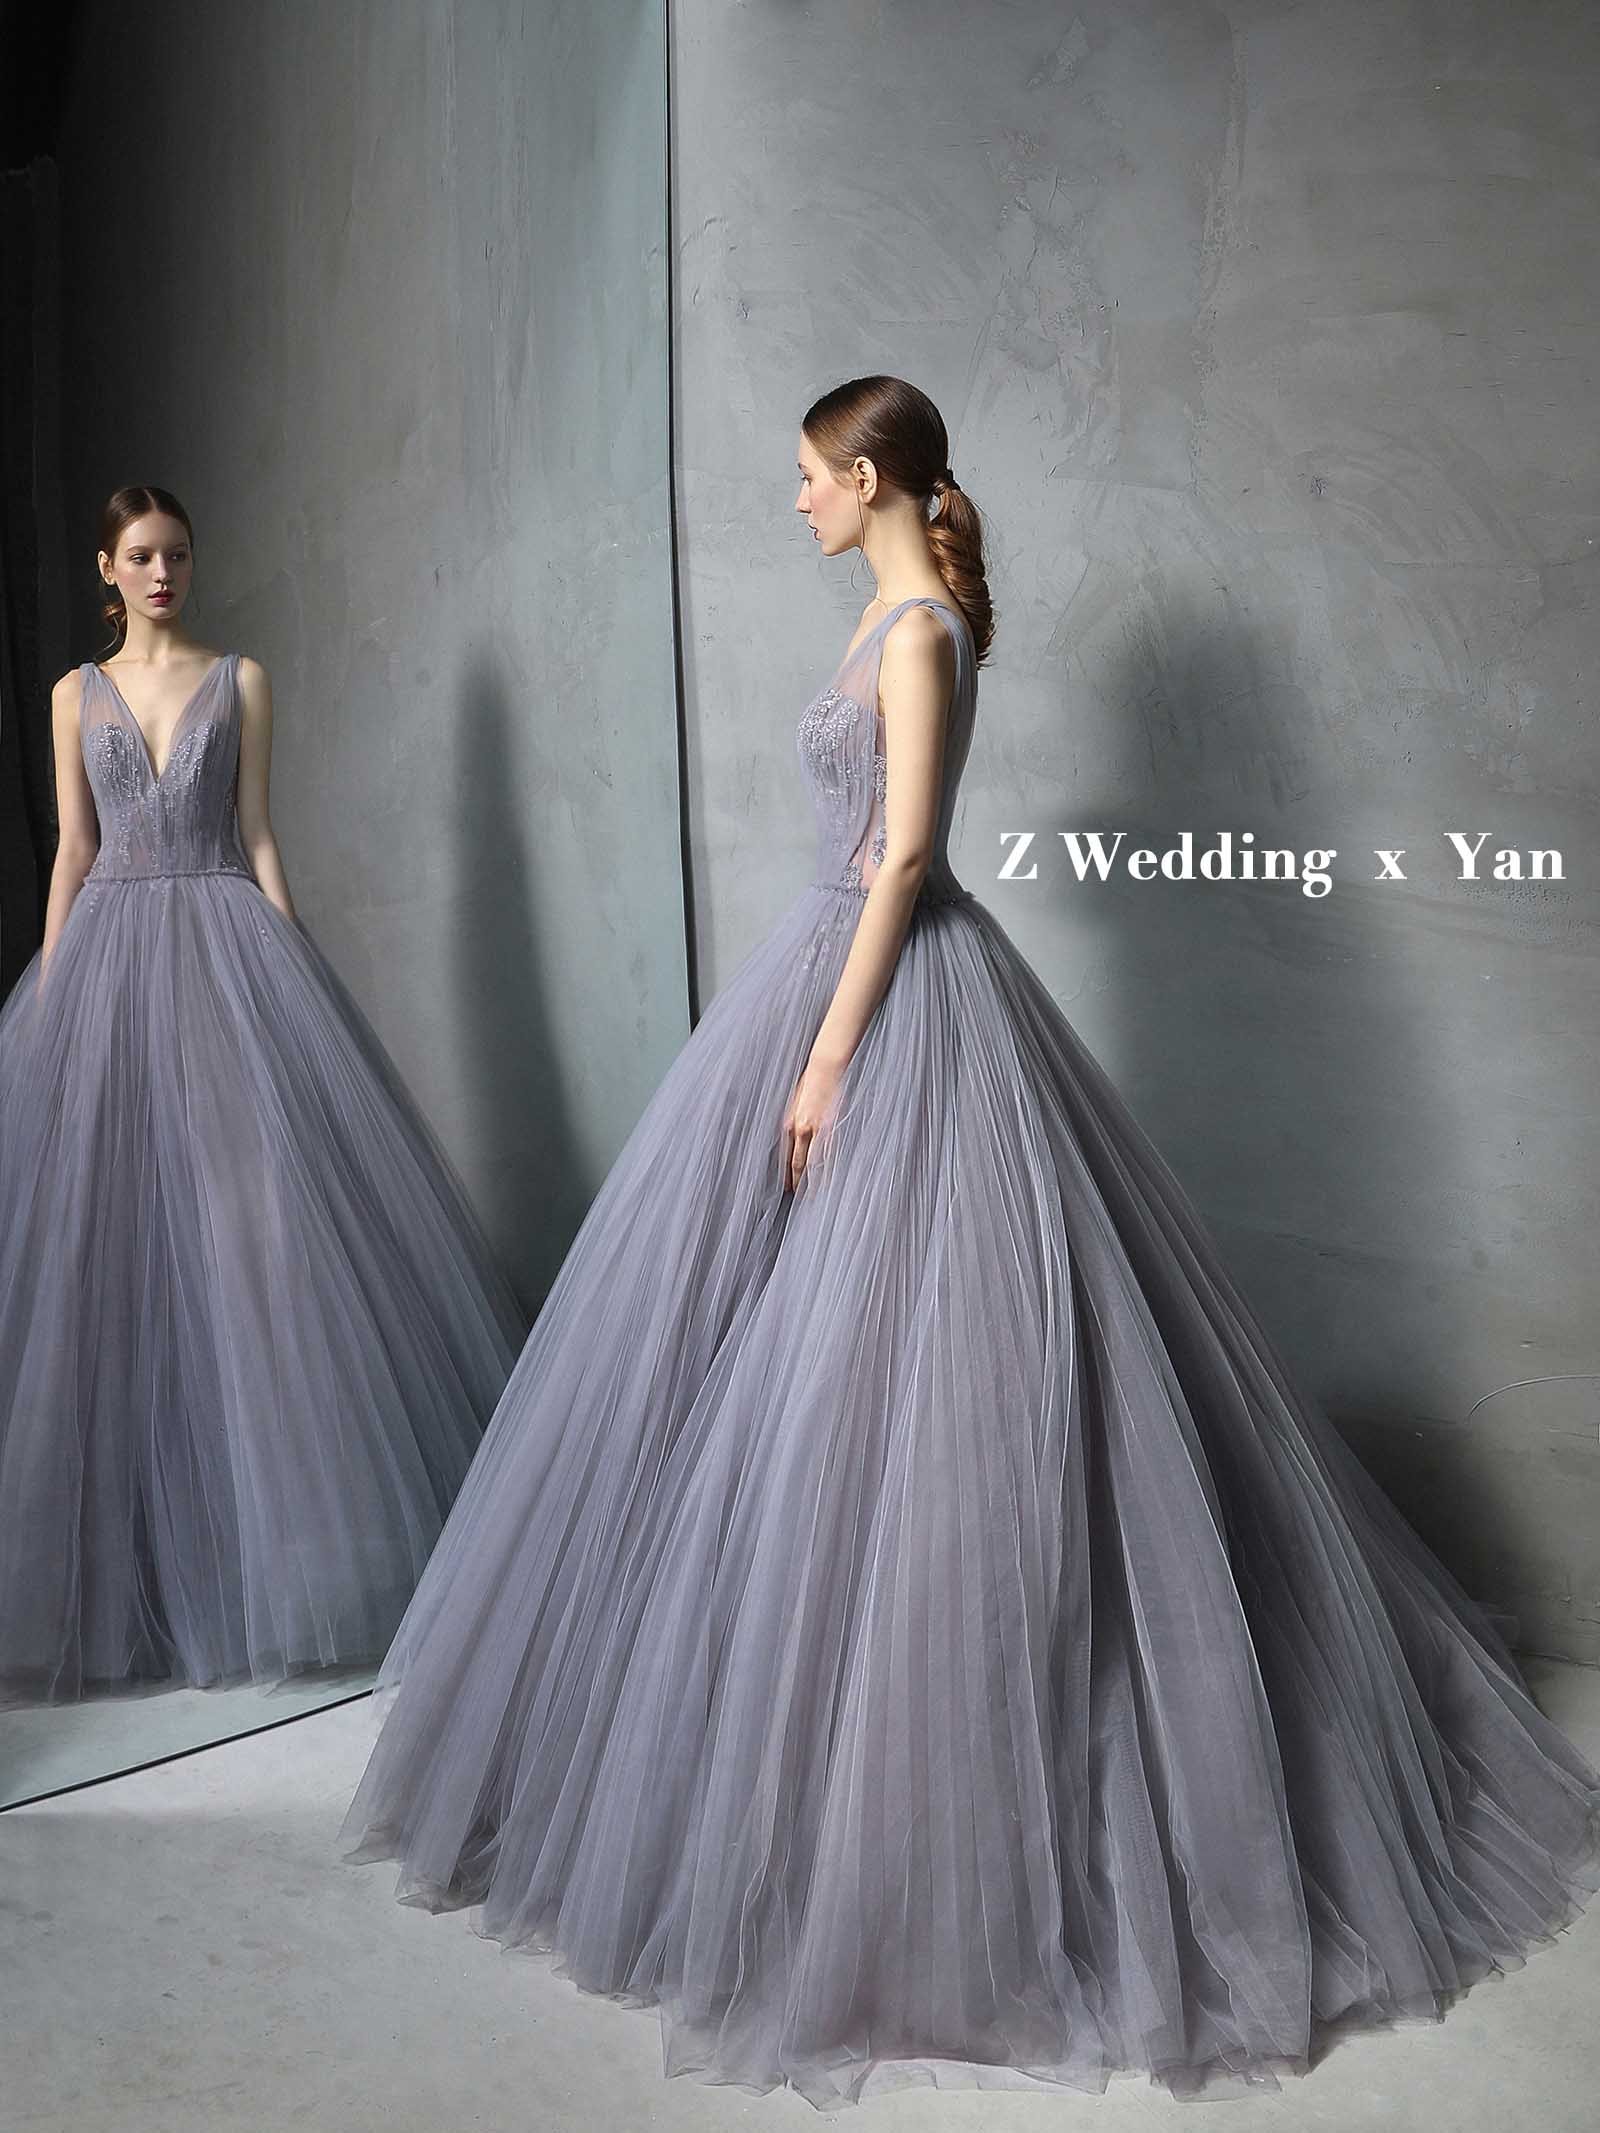 23 Gorgeous Wedding Gowns You Can Buy For Under S$100 NETT - ZULA.sg